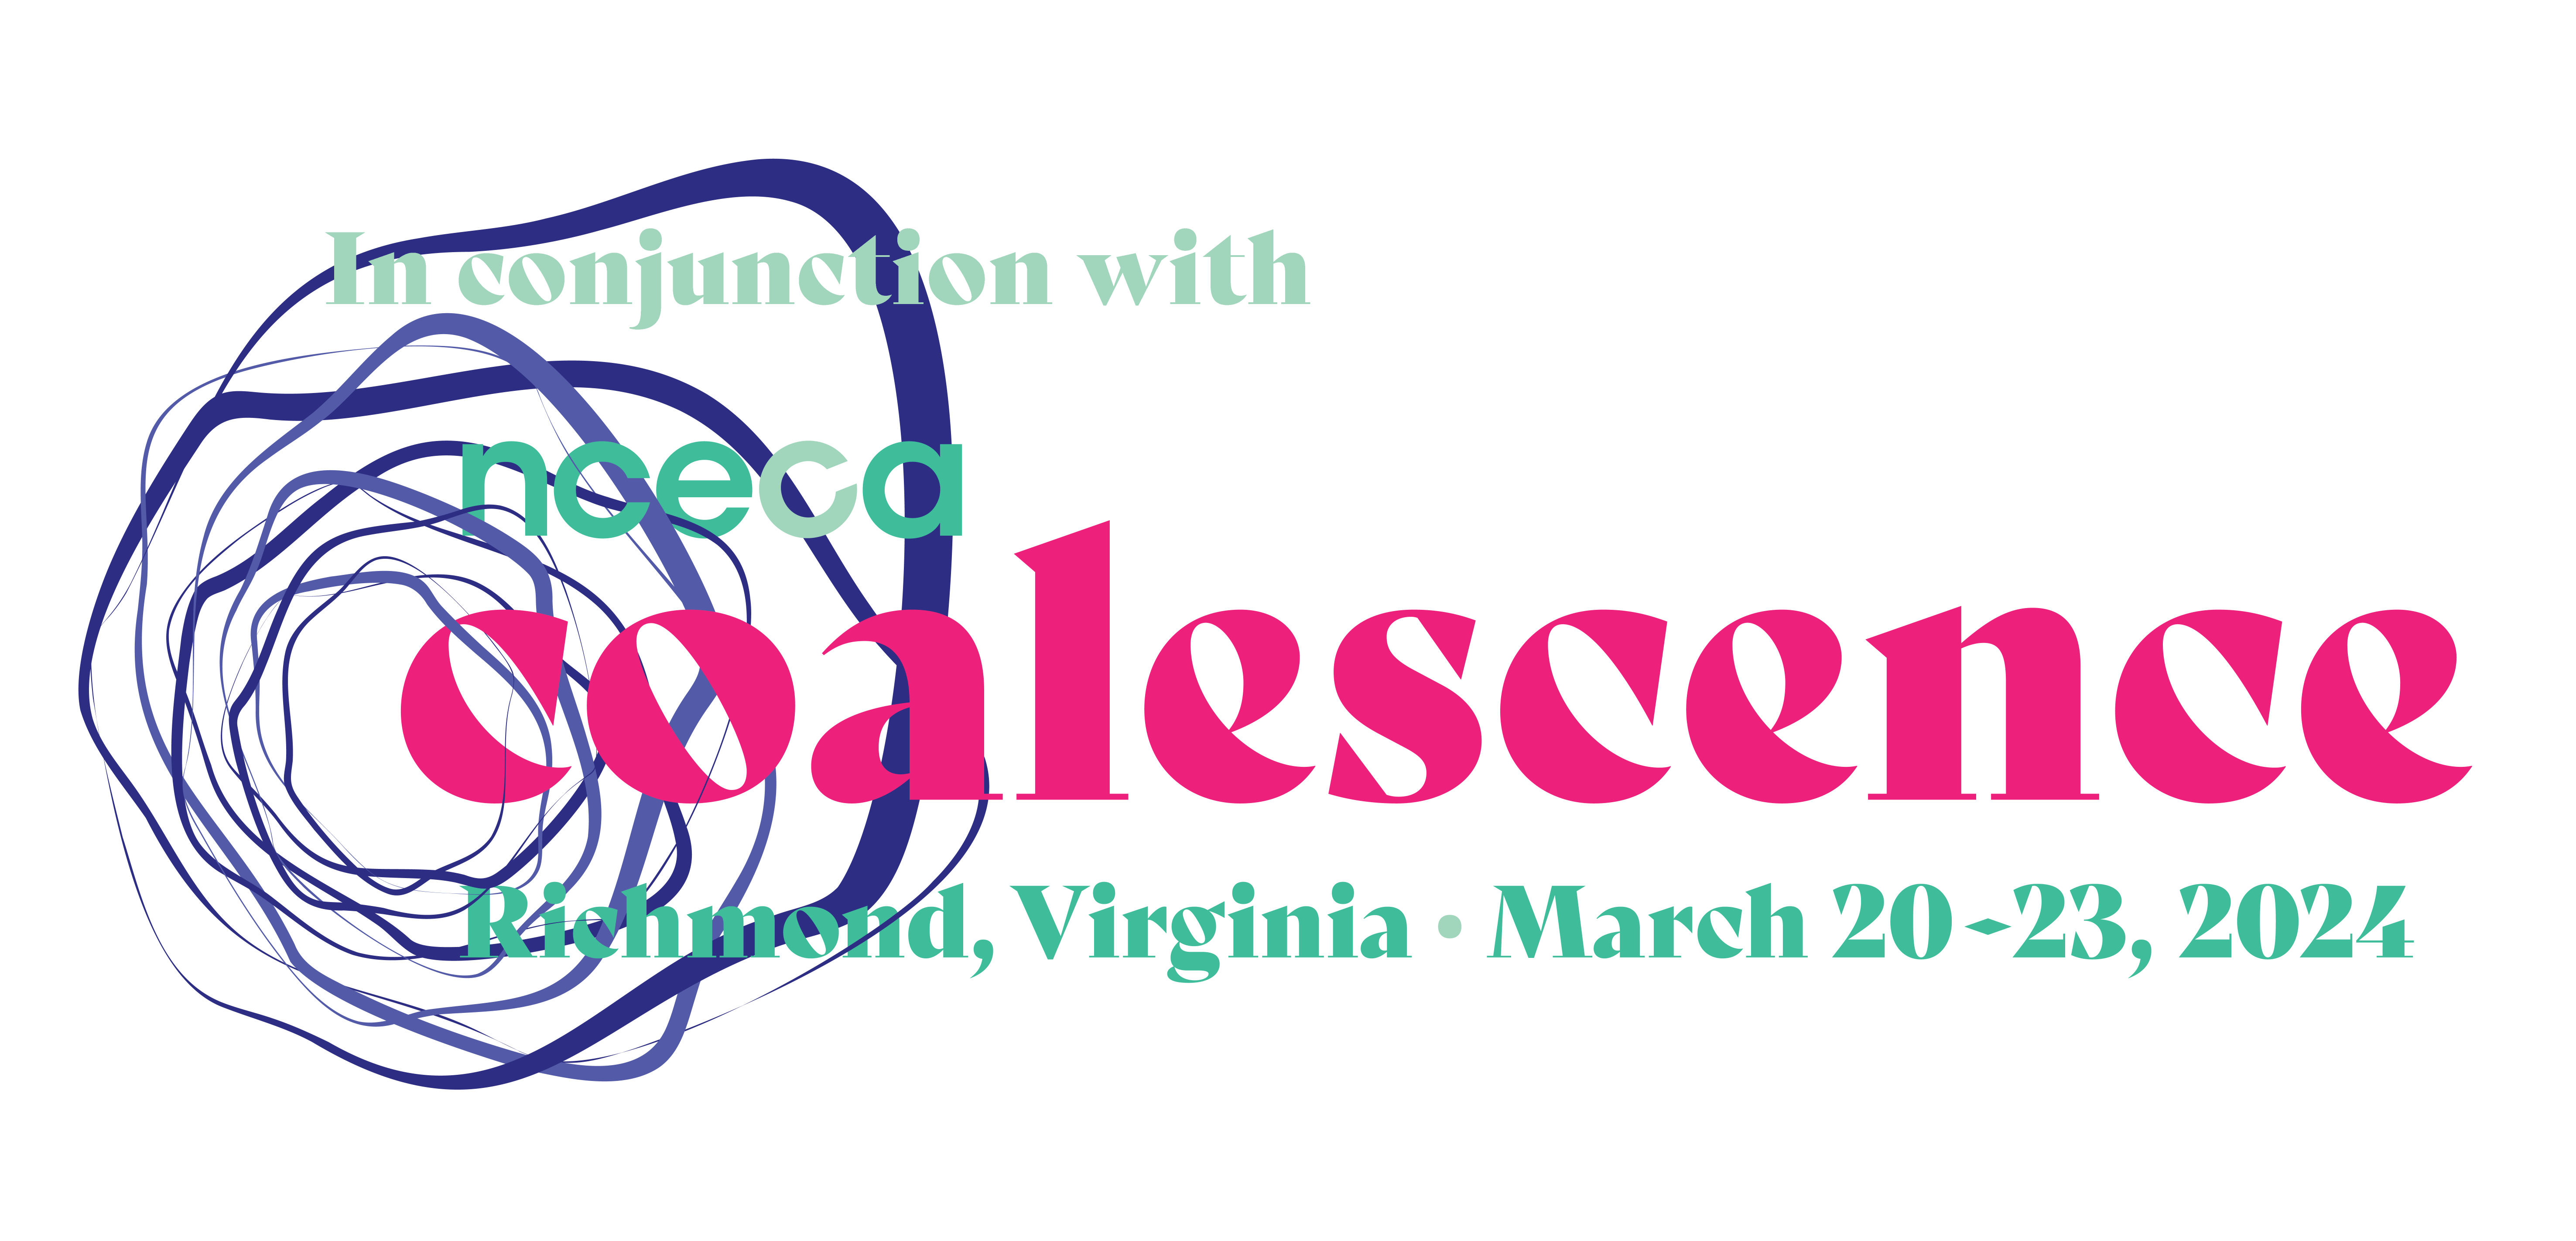 In conjunction with nceca coalescence. 58th Annual Conference Richmond, Virginia. March 20-23, 2024